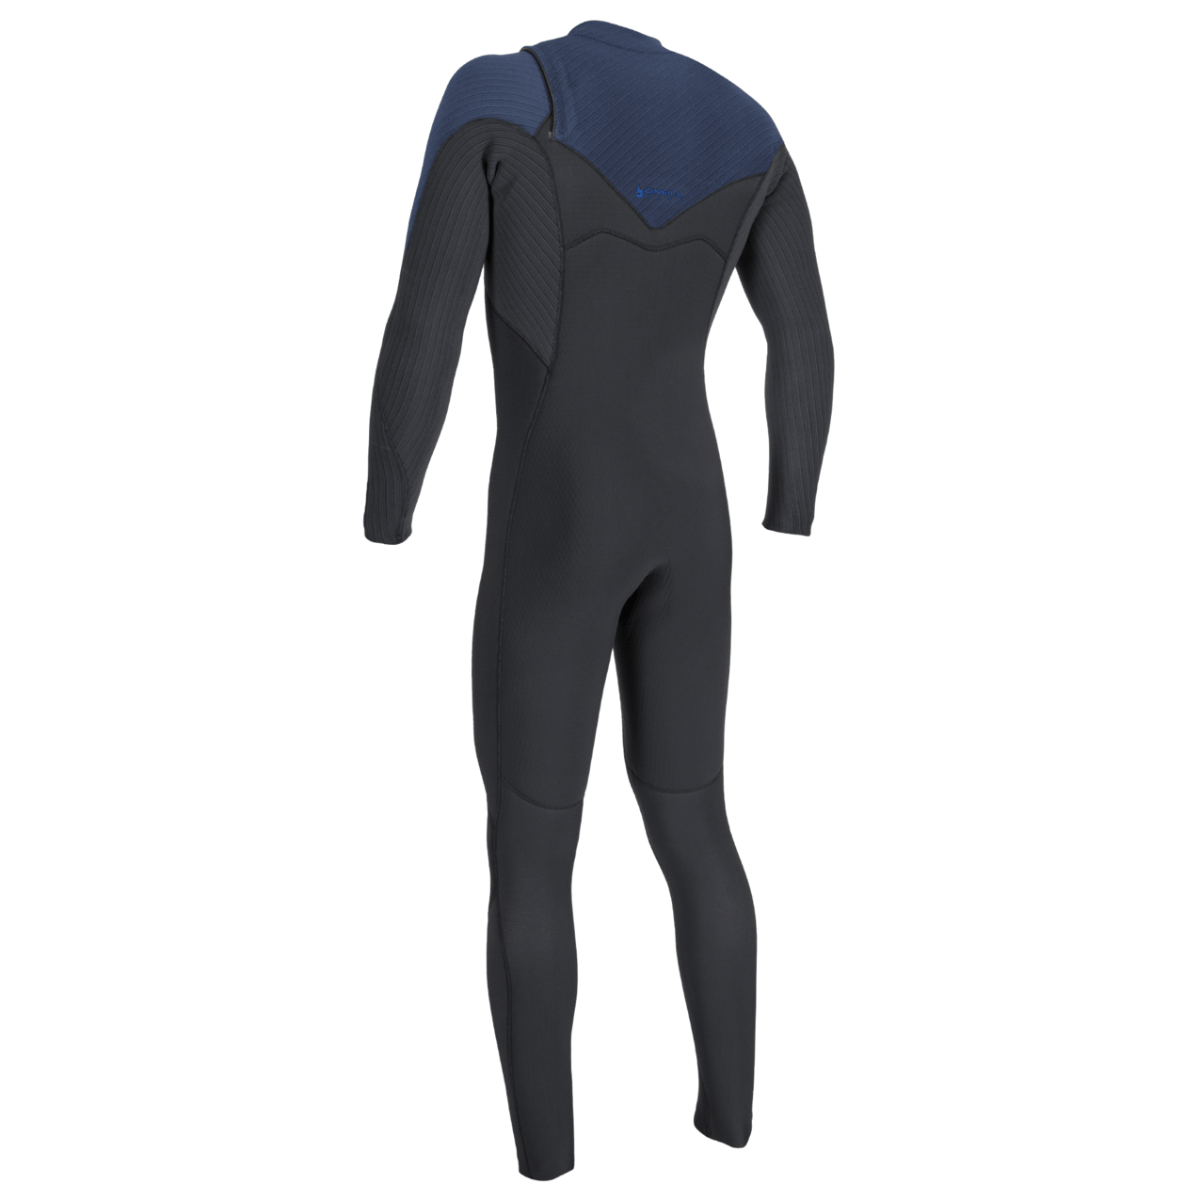 O'Neill Blueprint 3/2+mm Chest Zip Full Wetsuit in Black and Navy - BoardCo